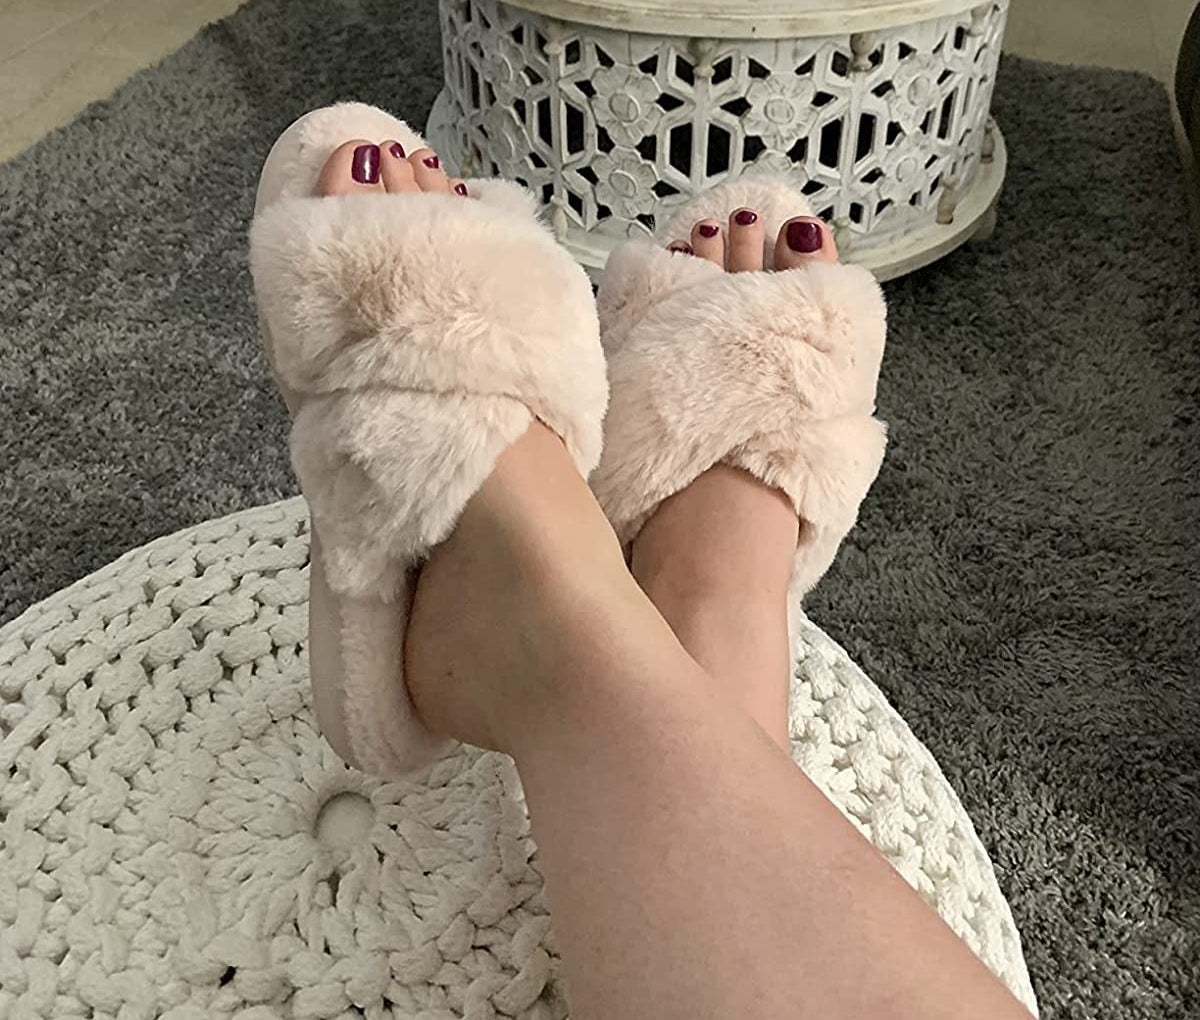 Reviewer wearing fuzzy slippers